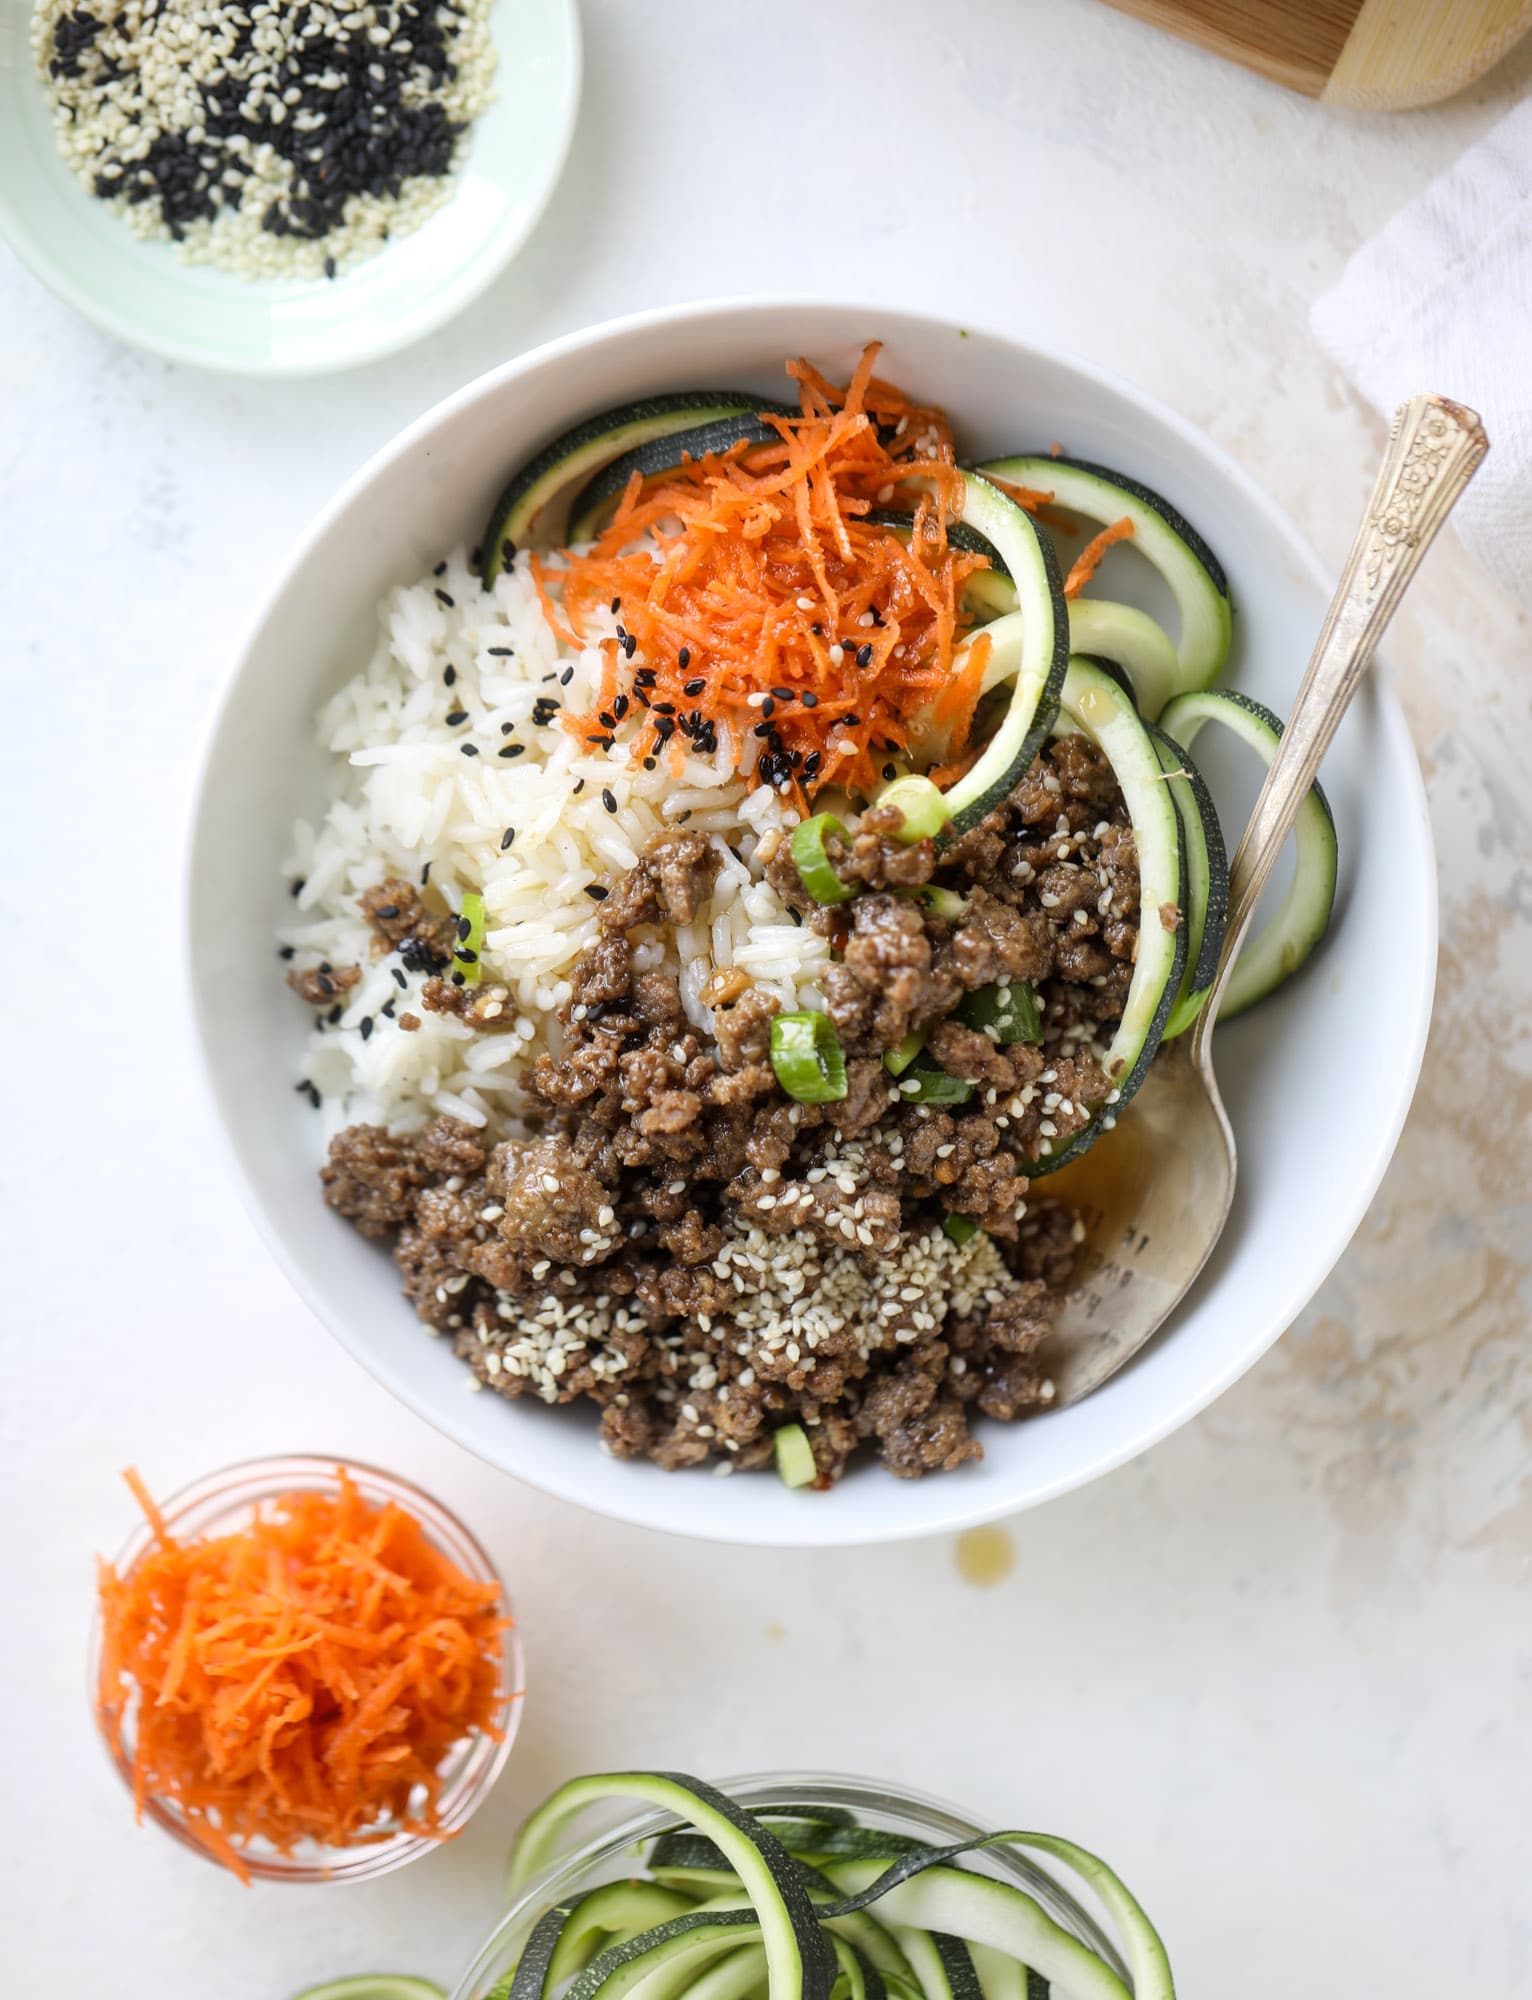 These korean beef bowls are so packed full of flavor that you won't want to eat anything else! Serve the beef with zucchini noodles, grated carrot and jasmine rice for a satisfying, flavor-packed bowl that comes together easily and quick! I howsweeteats.com #korean #beef